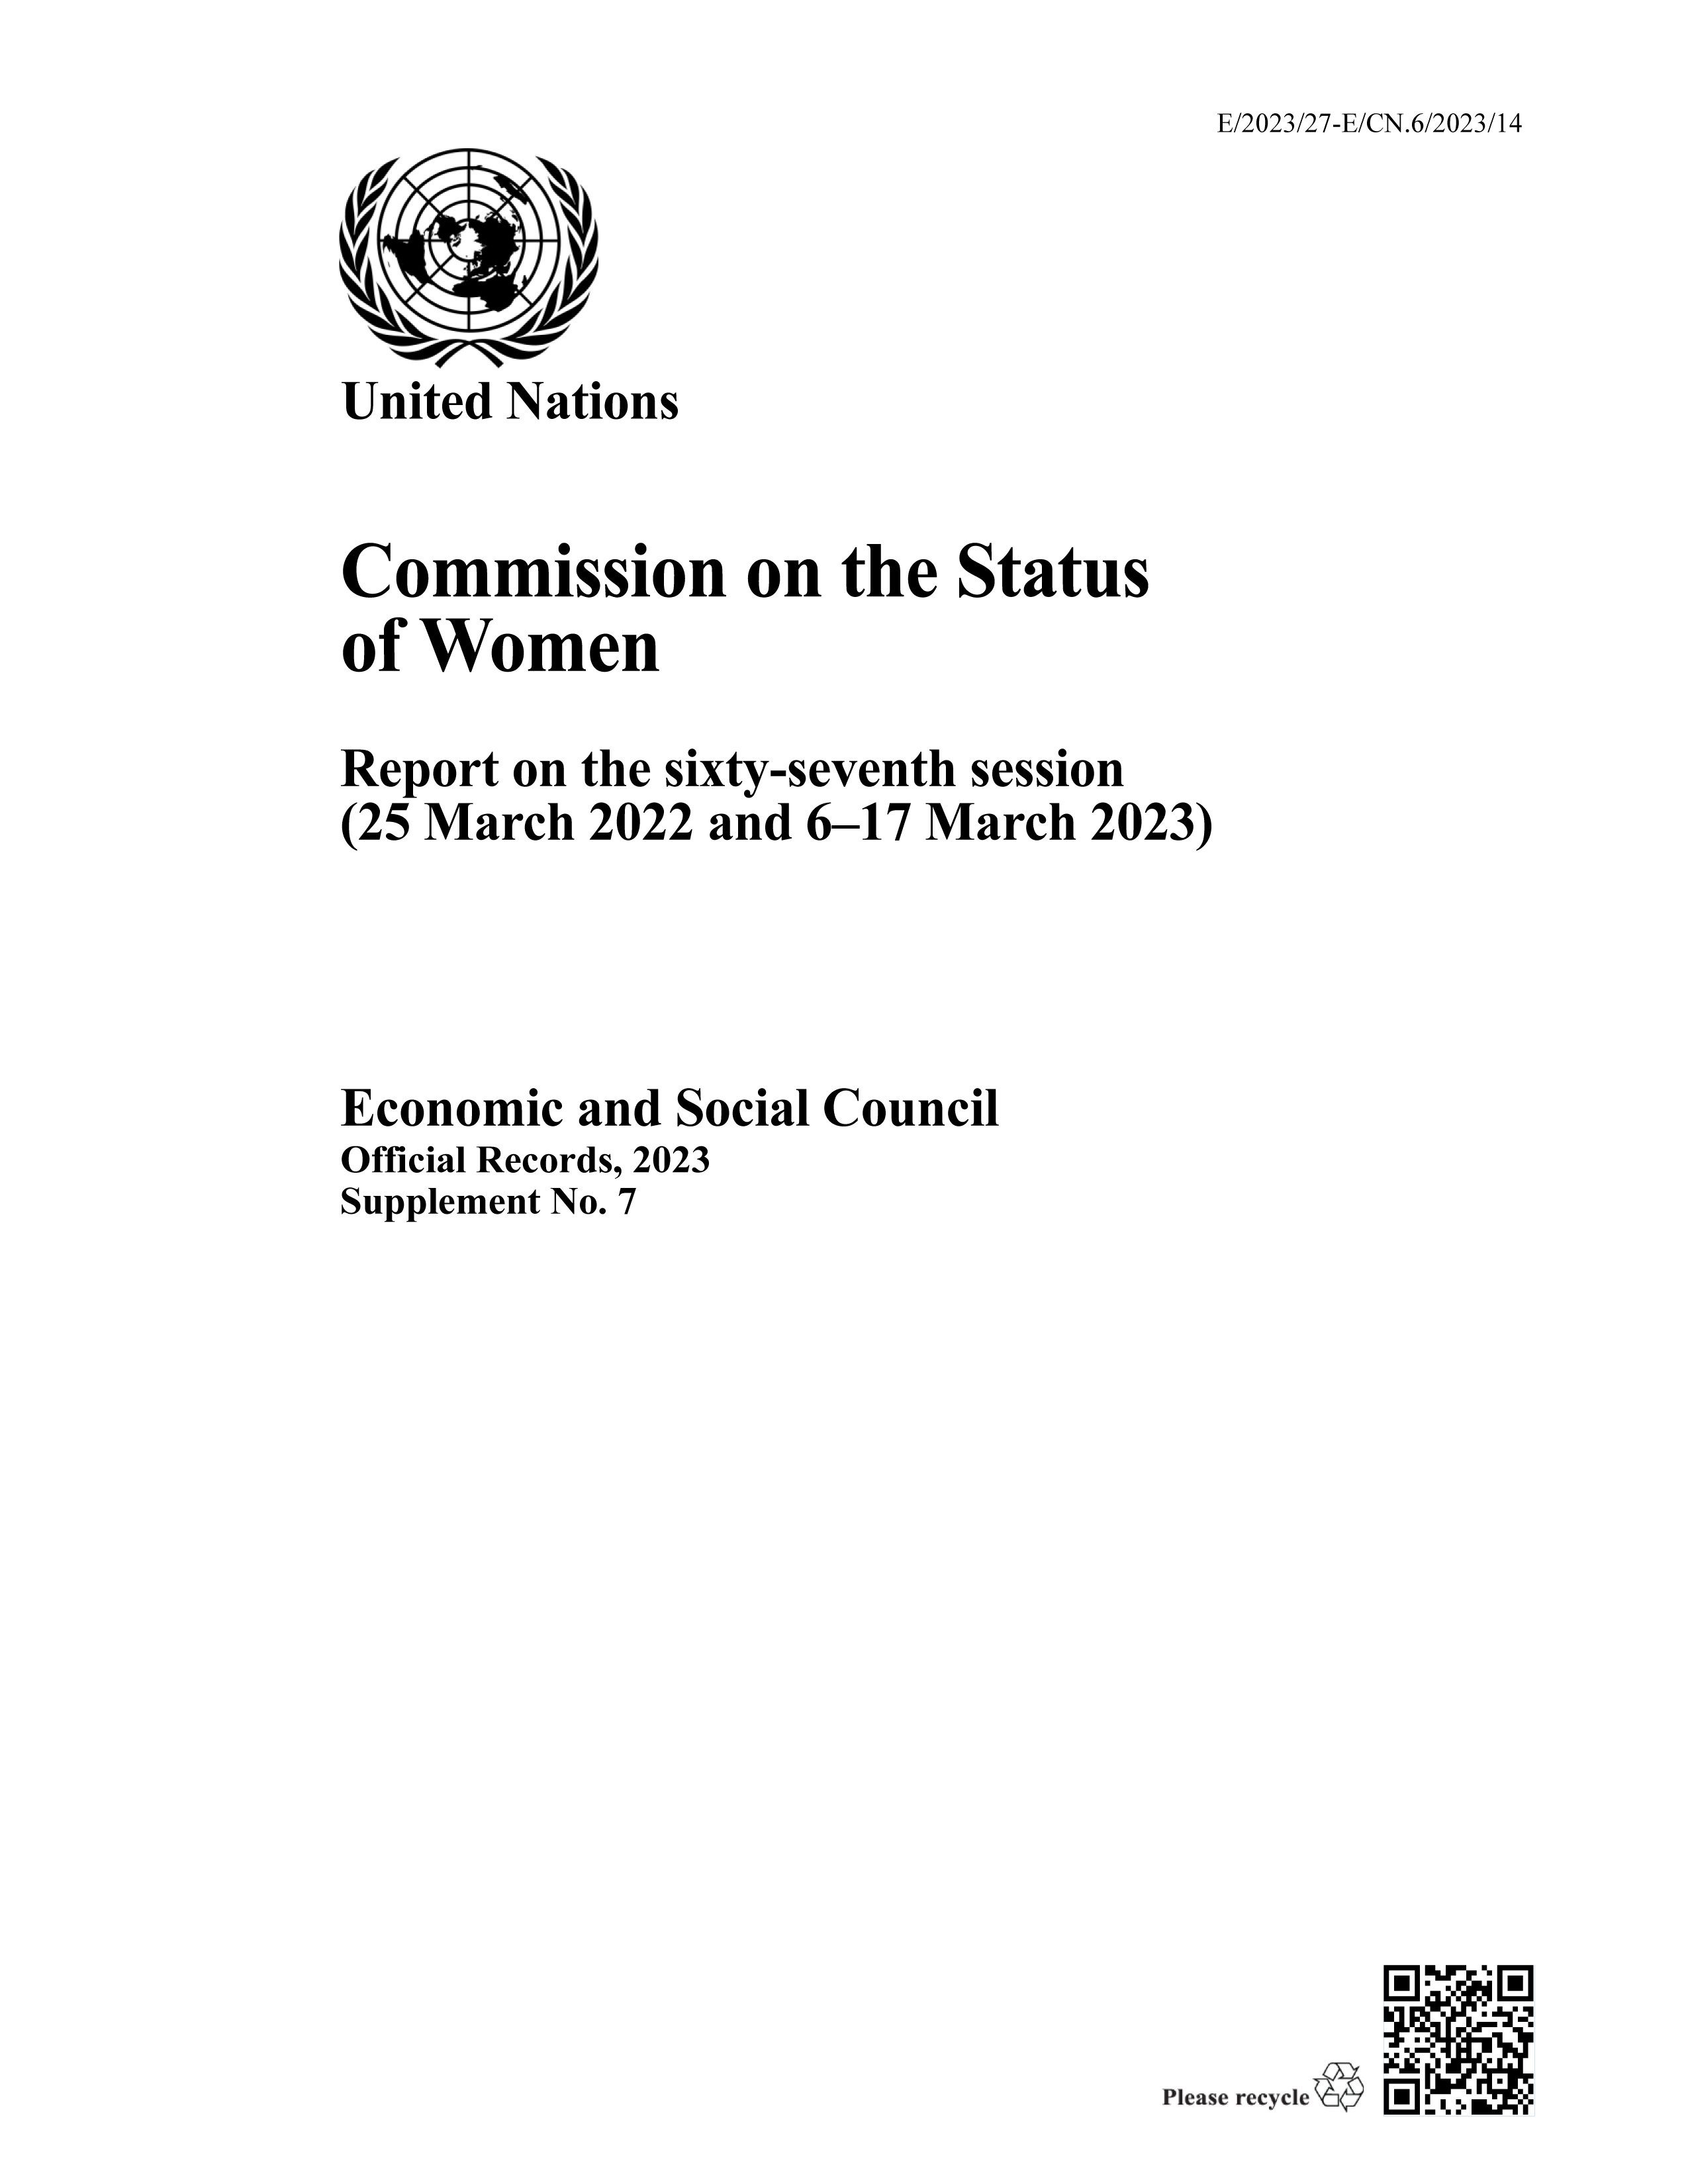 image of Report of the Commission on the Status of Women 2023